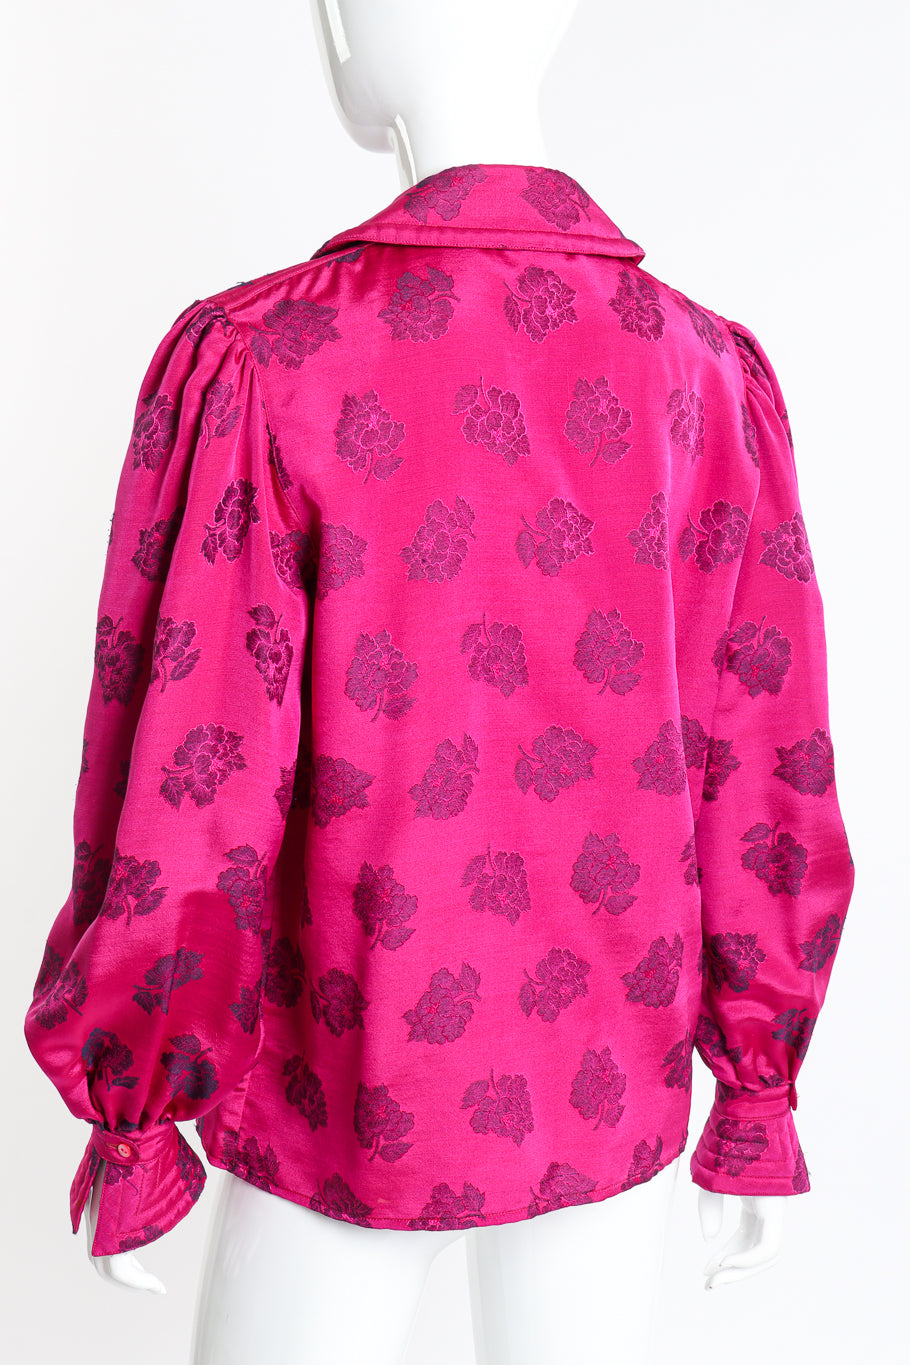 Floral Quilted Dagger Collar Blouse by Escada back view on mannequin @Recess LA